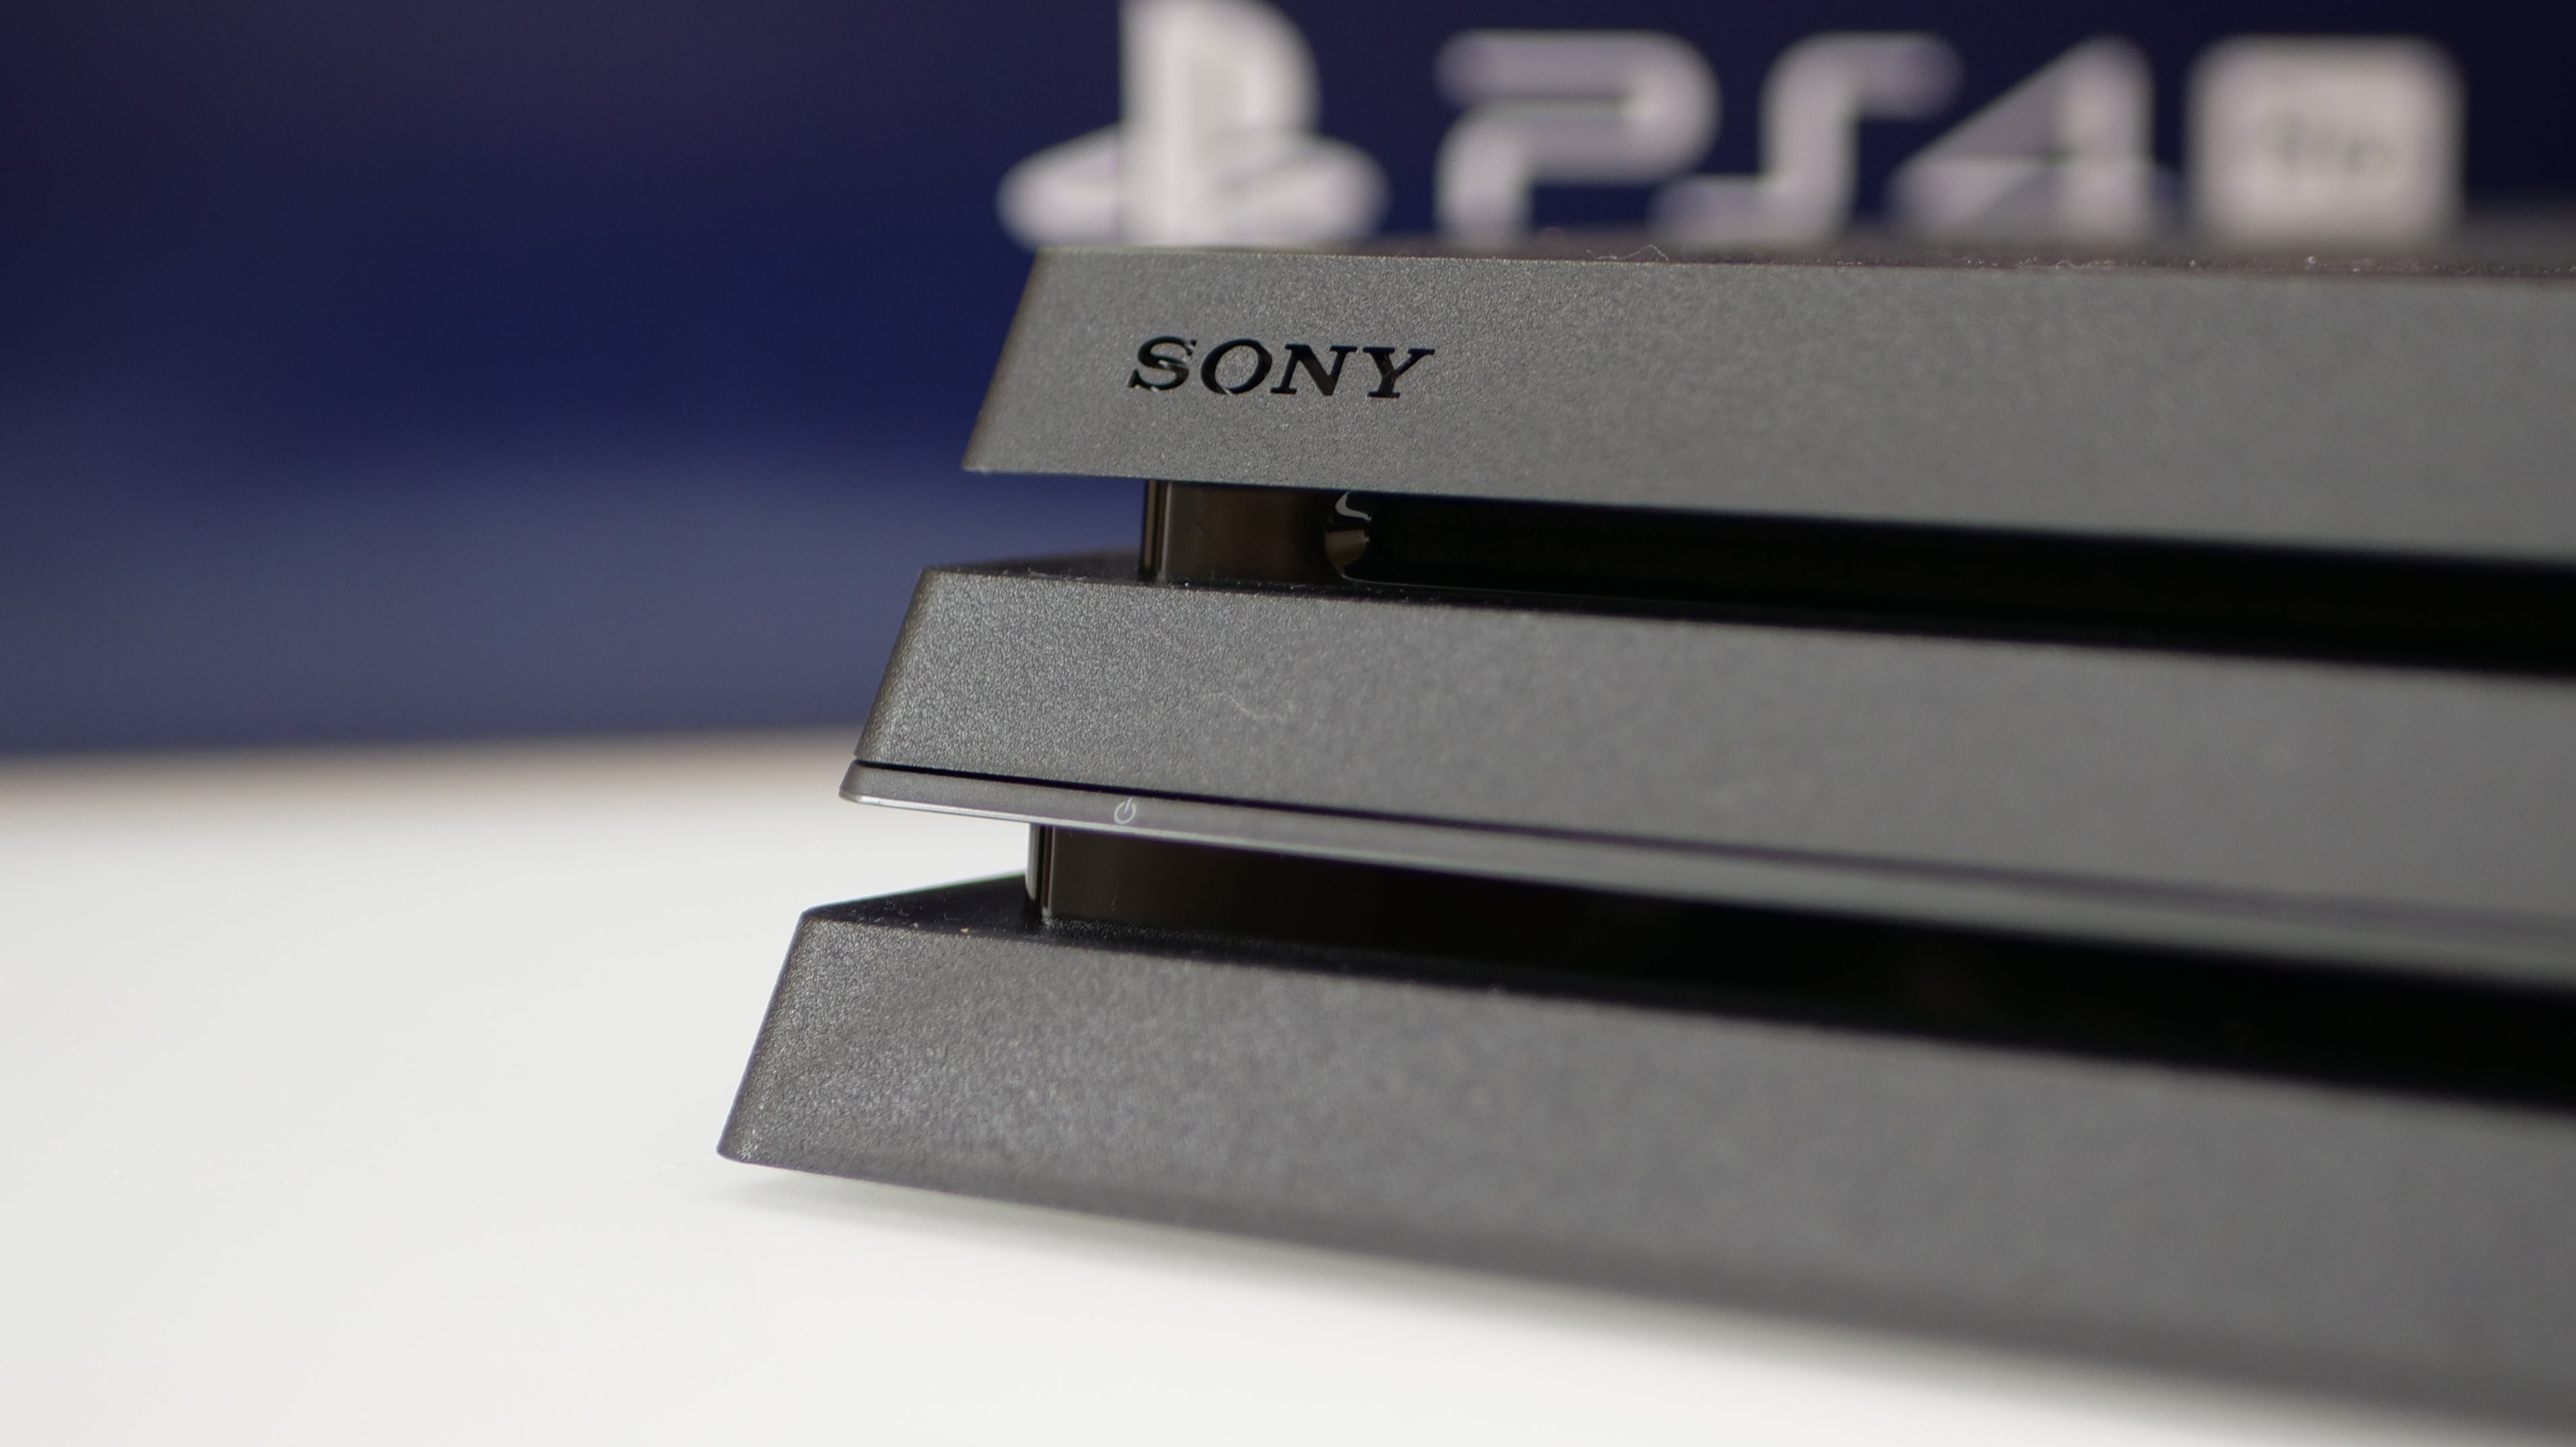 Stadion Indrømme pille PlayStation 4 Pro CUH-7200 review: the latest, quietest hardware revision |  Eurogamer.net